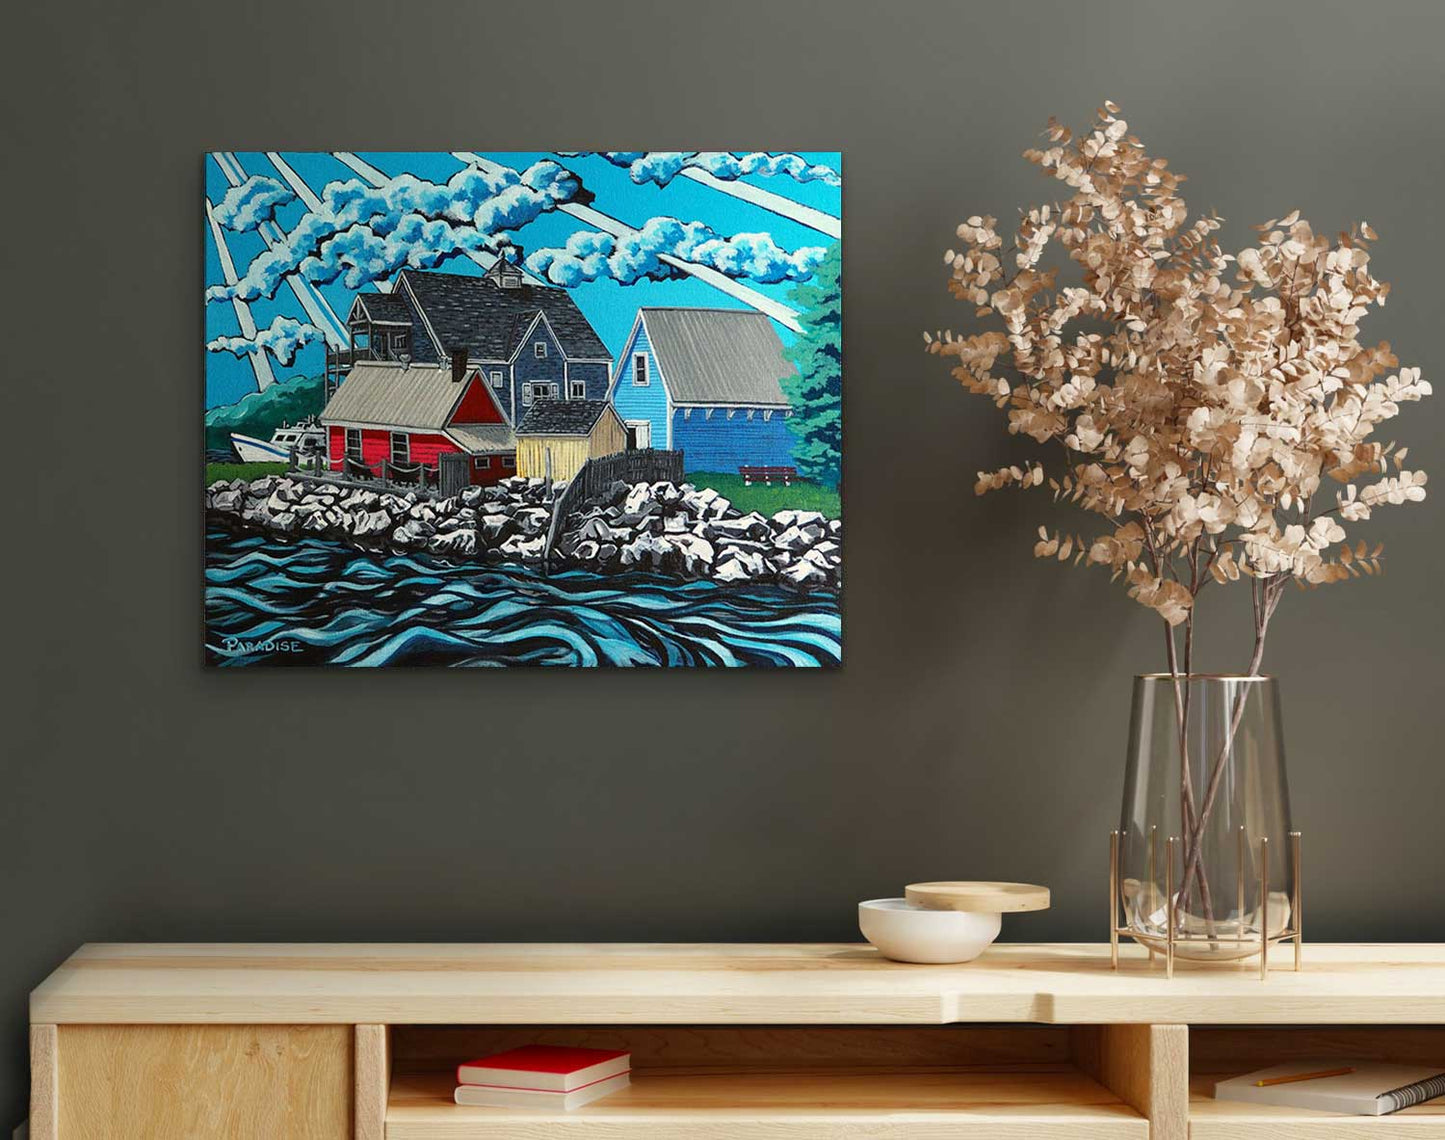 Pictou Harbour part of the Heritage Quay Birth Place of Nova Scotia. A timeless piece of history that brings the beauty of the Canadian Maritimes right to your home. Painted by professional Canadian andscape artist. visual art ready to hang on your wall